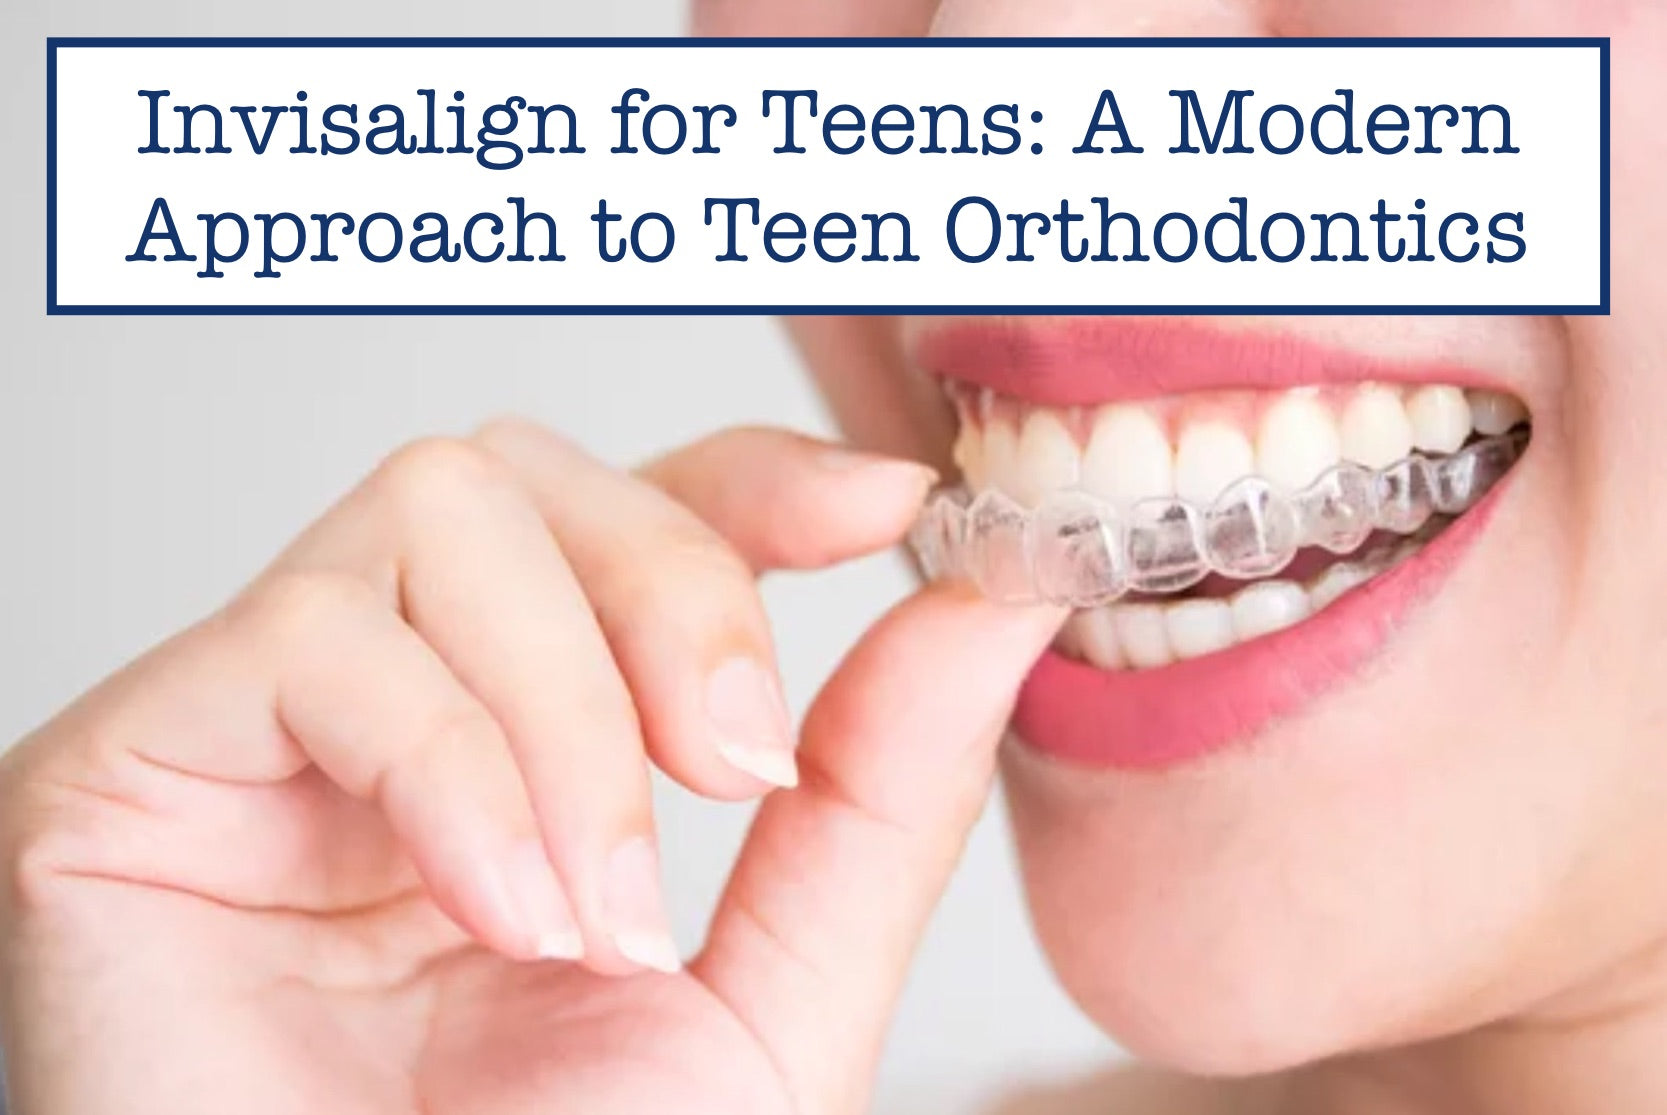 Invisalign for Teens: A Modern Approach to Teen Orthodontics